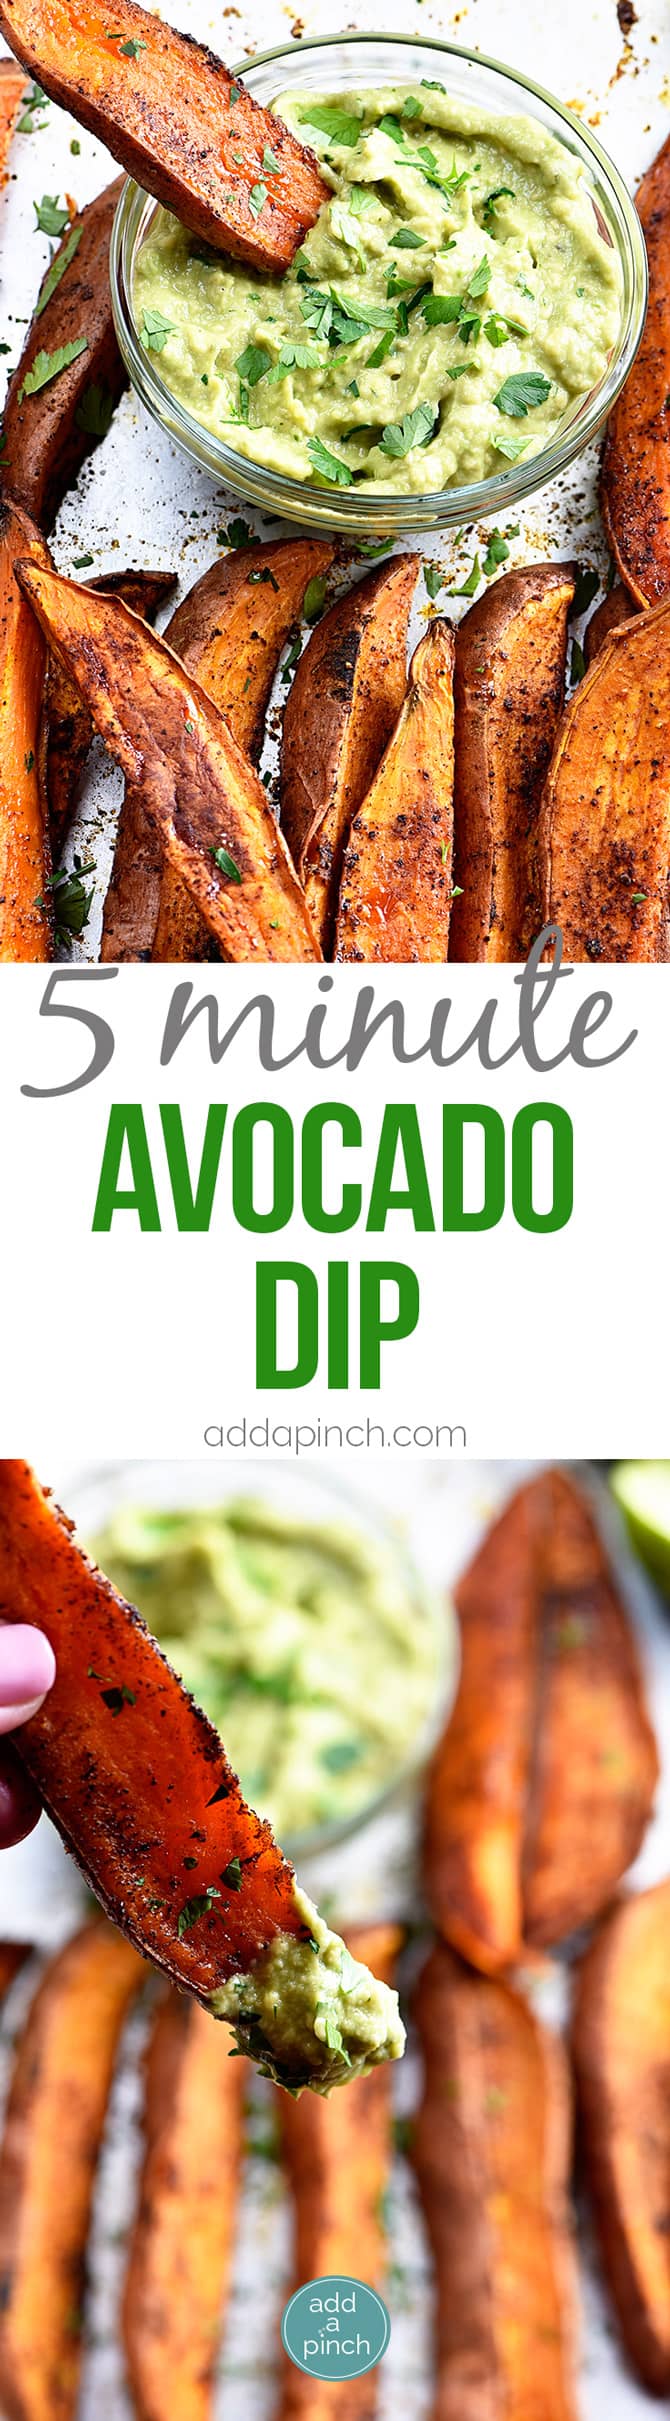 Avocado Dip (Avocado Crema) Recipe - This avocado dip recipe is quick, easy and delicious! It comes together in five minutes and is delicious served with so many dishes! // addapinch.com